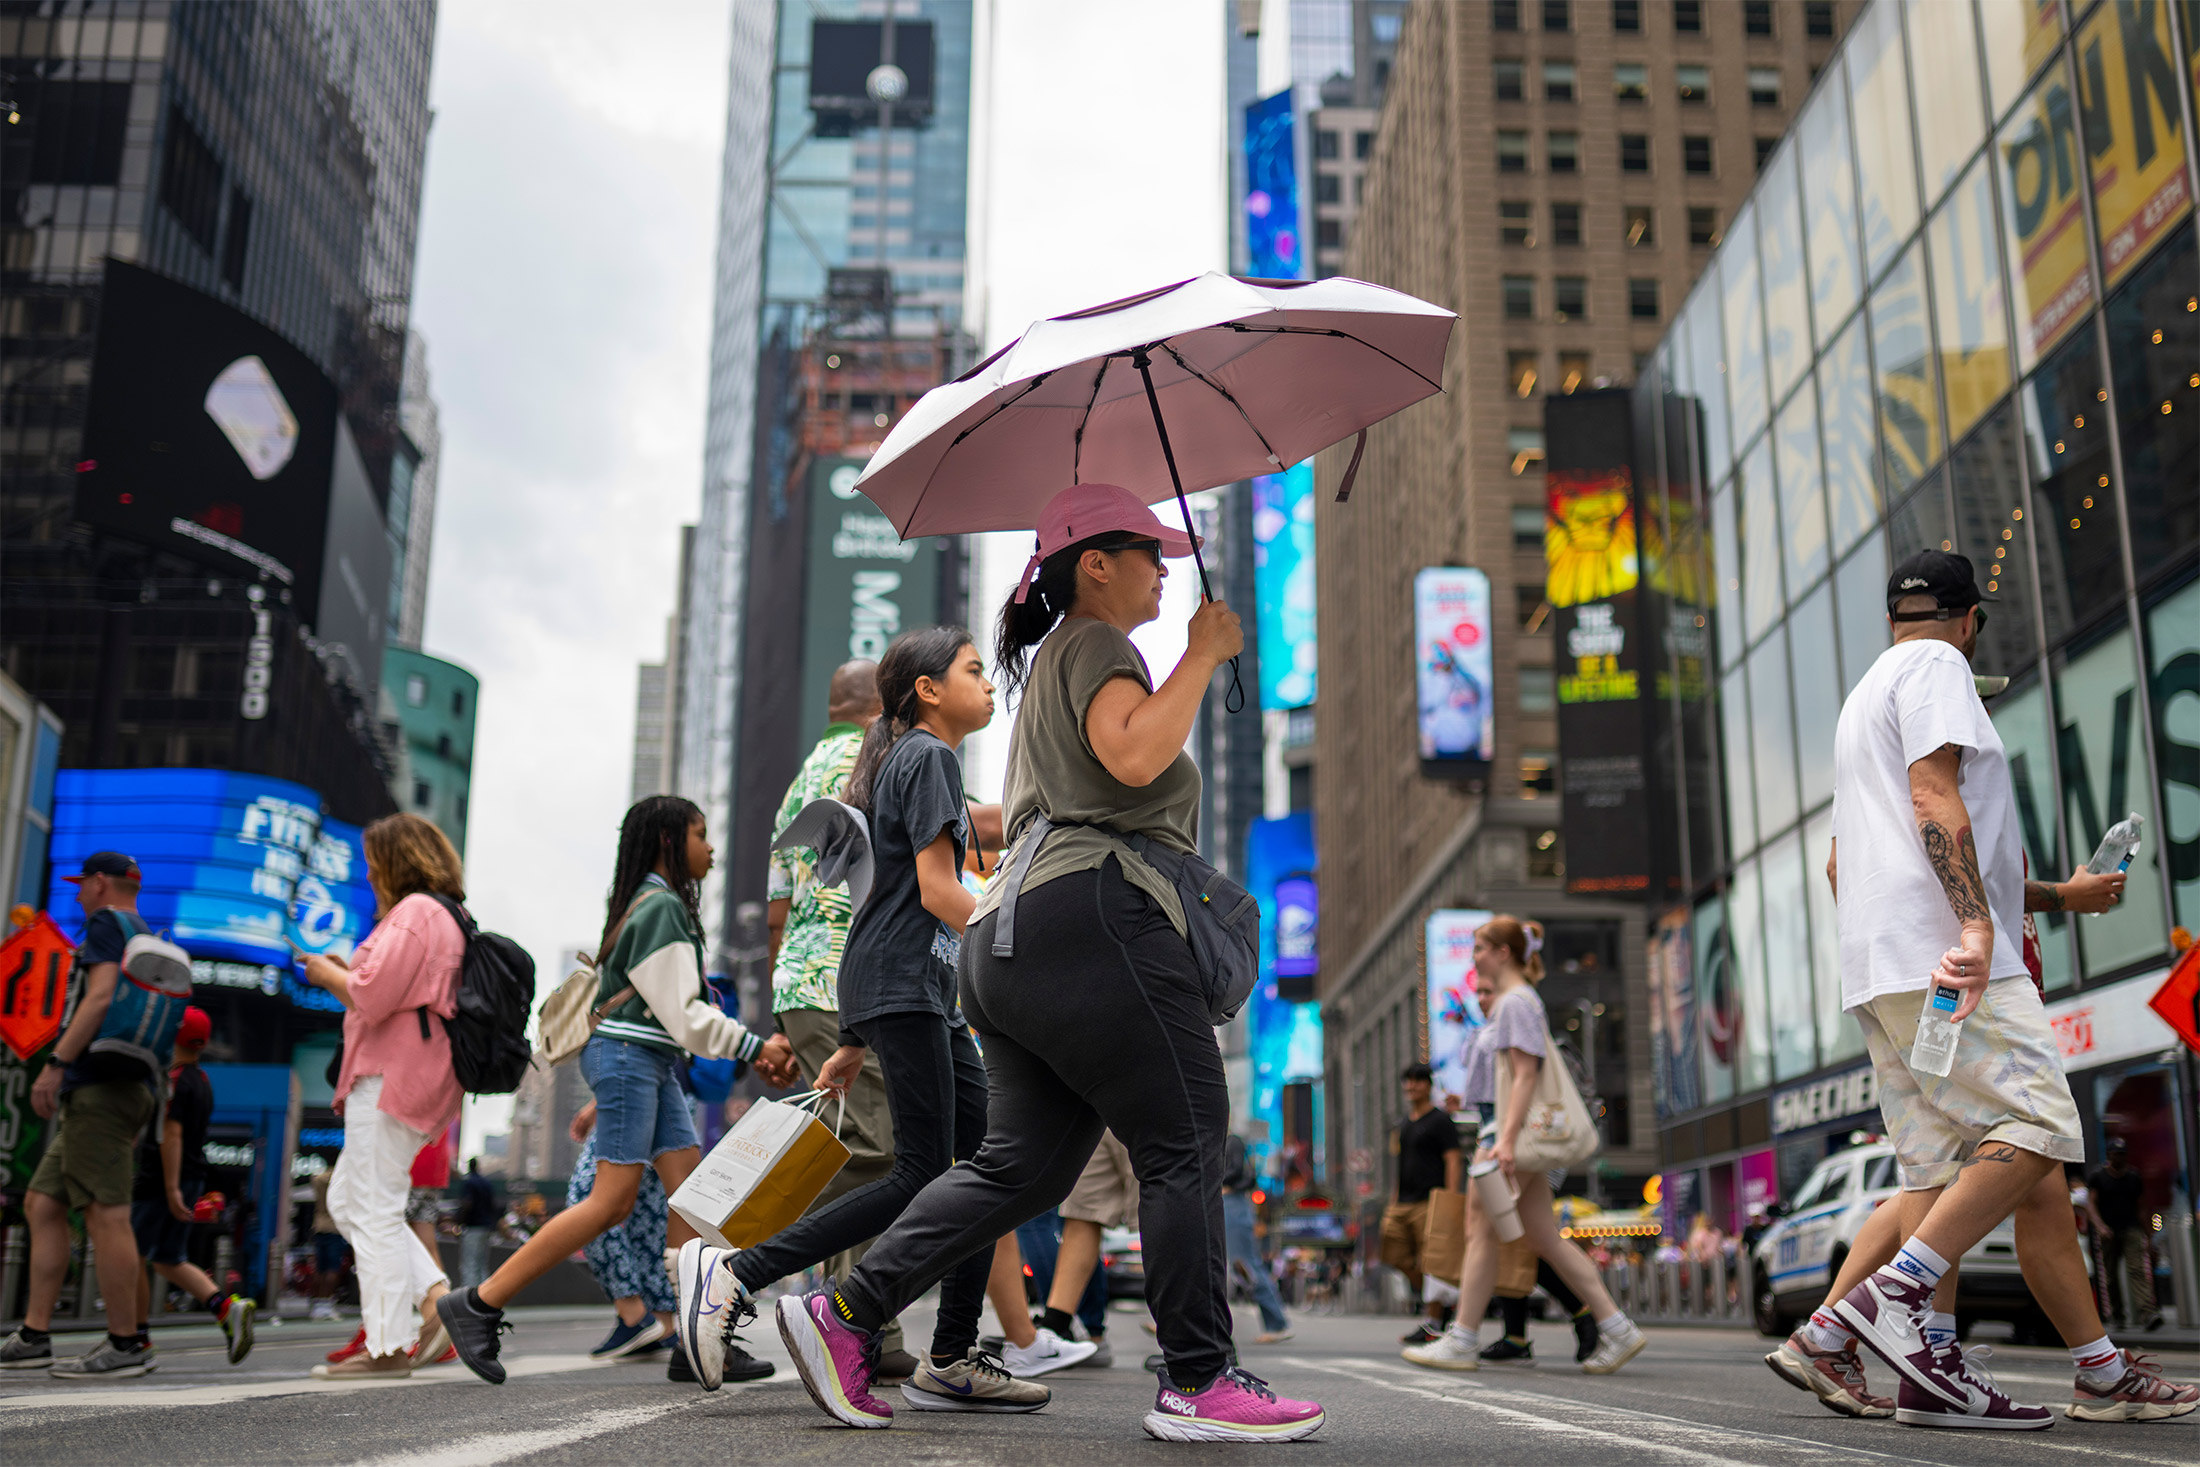 NYC Prepares for Busy Summer Weather, Tree Planting and Cooling Initiatives